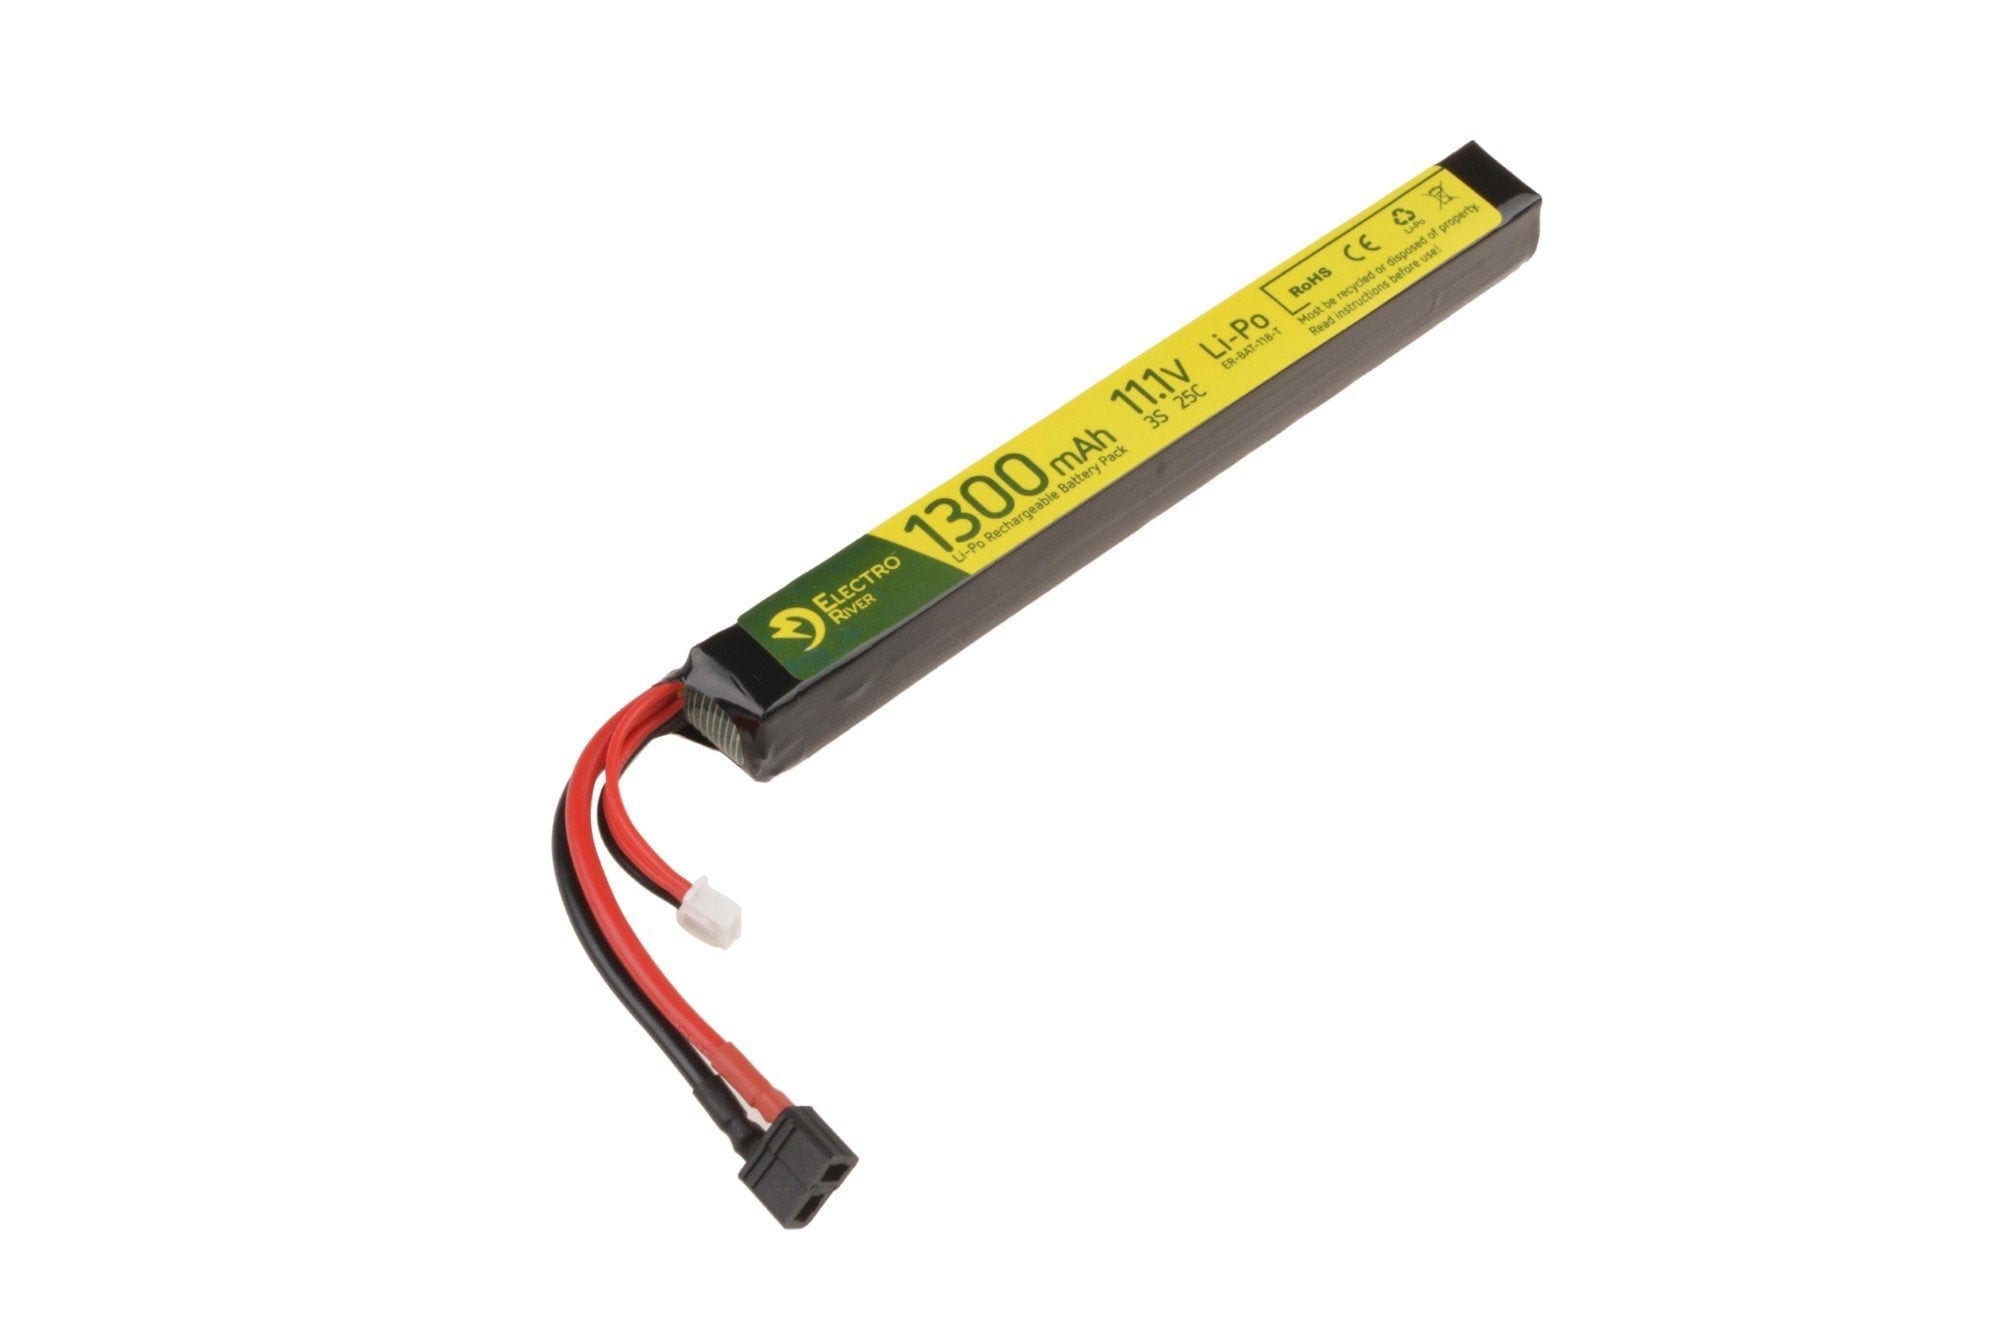 LiPo 11.1V 1300mAh 25/50C T-connect (DEANS) Battery by Electro River on Airsoft Mania Europe